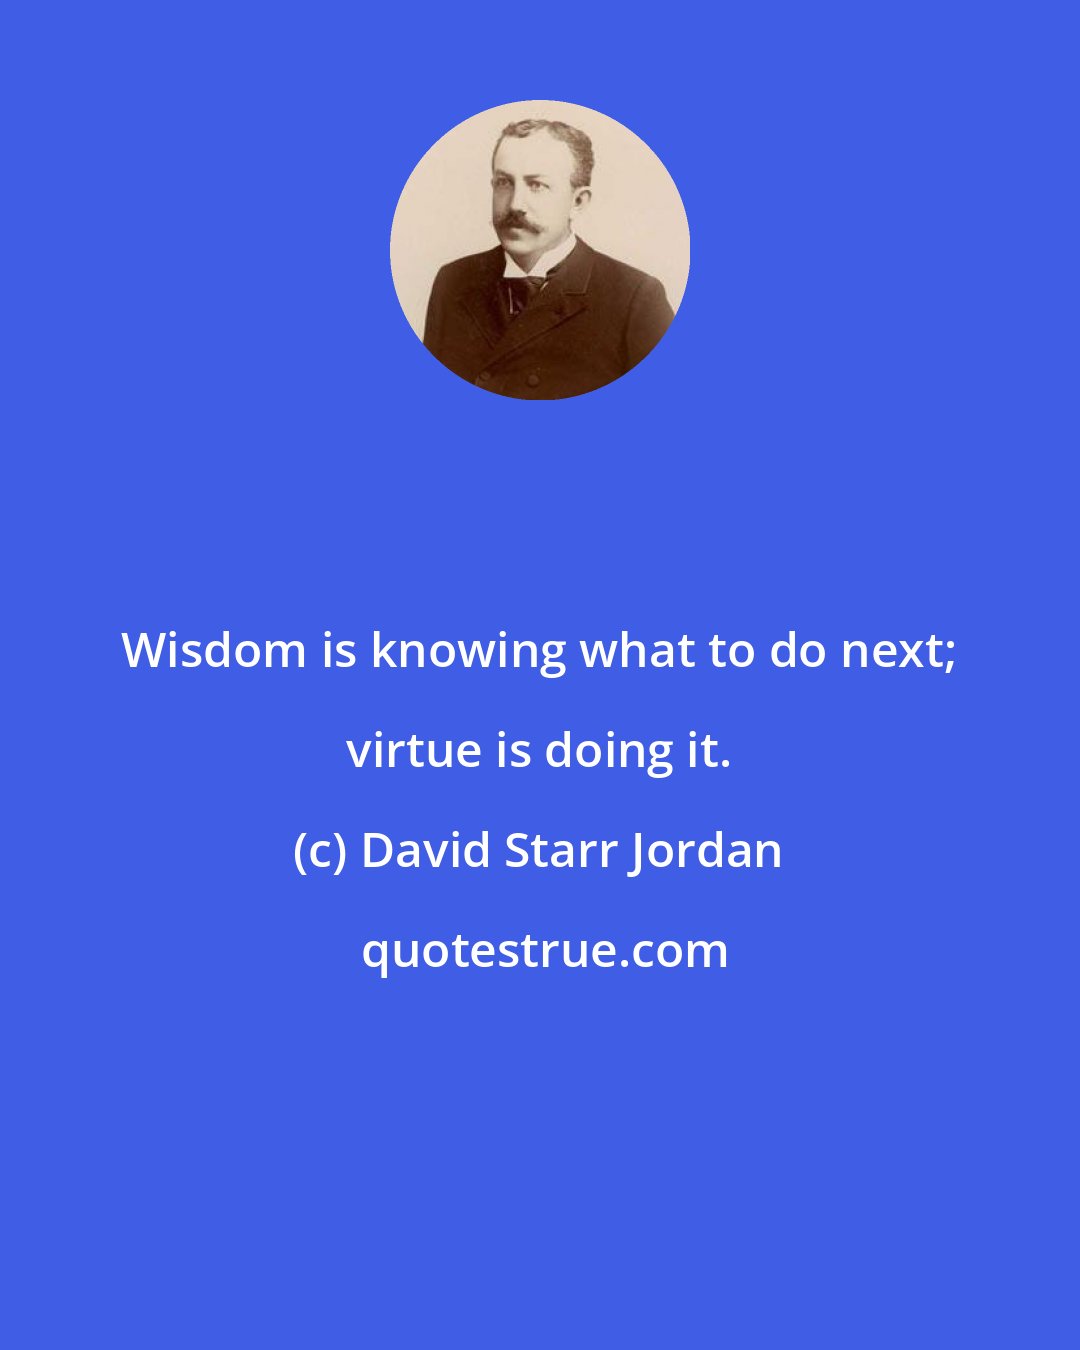 David Starr Jordan: Wisdom is knowing what to do next; virtue is doing it.